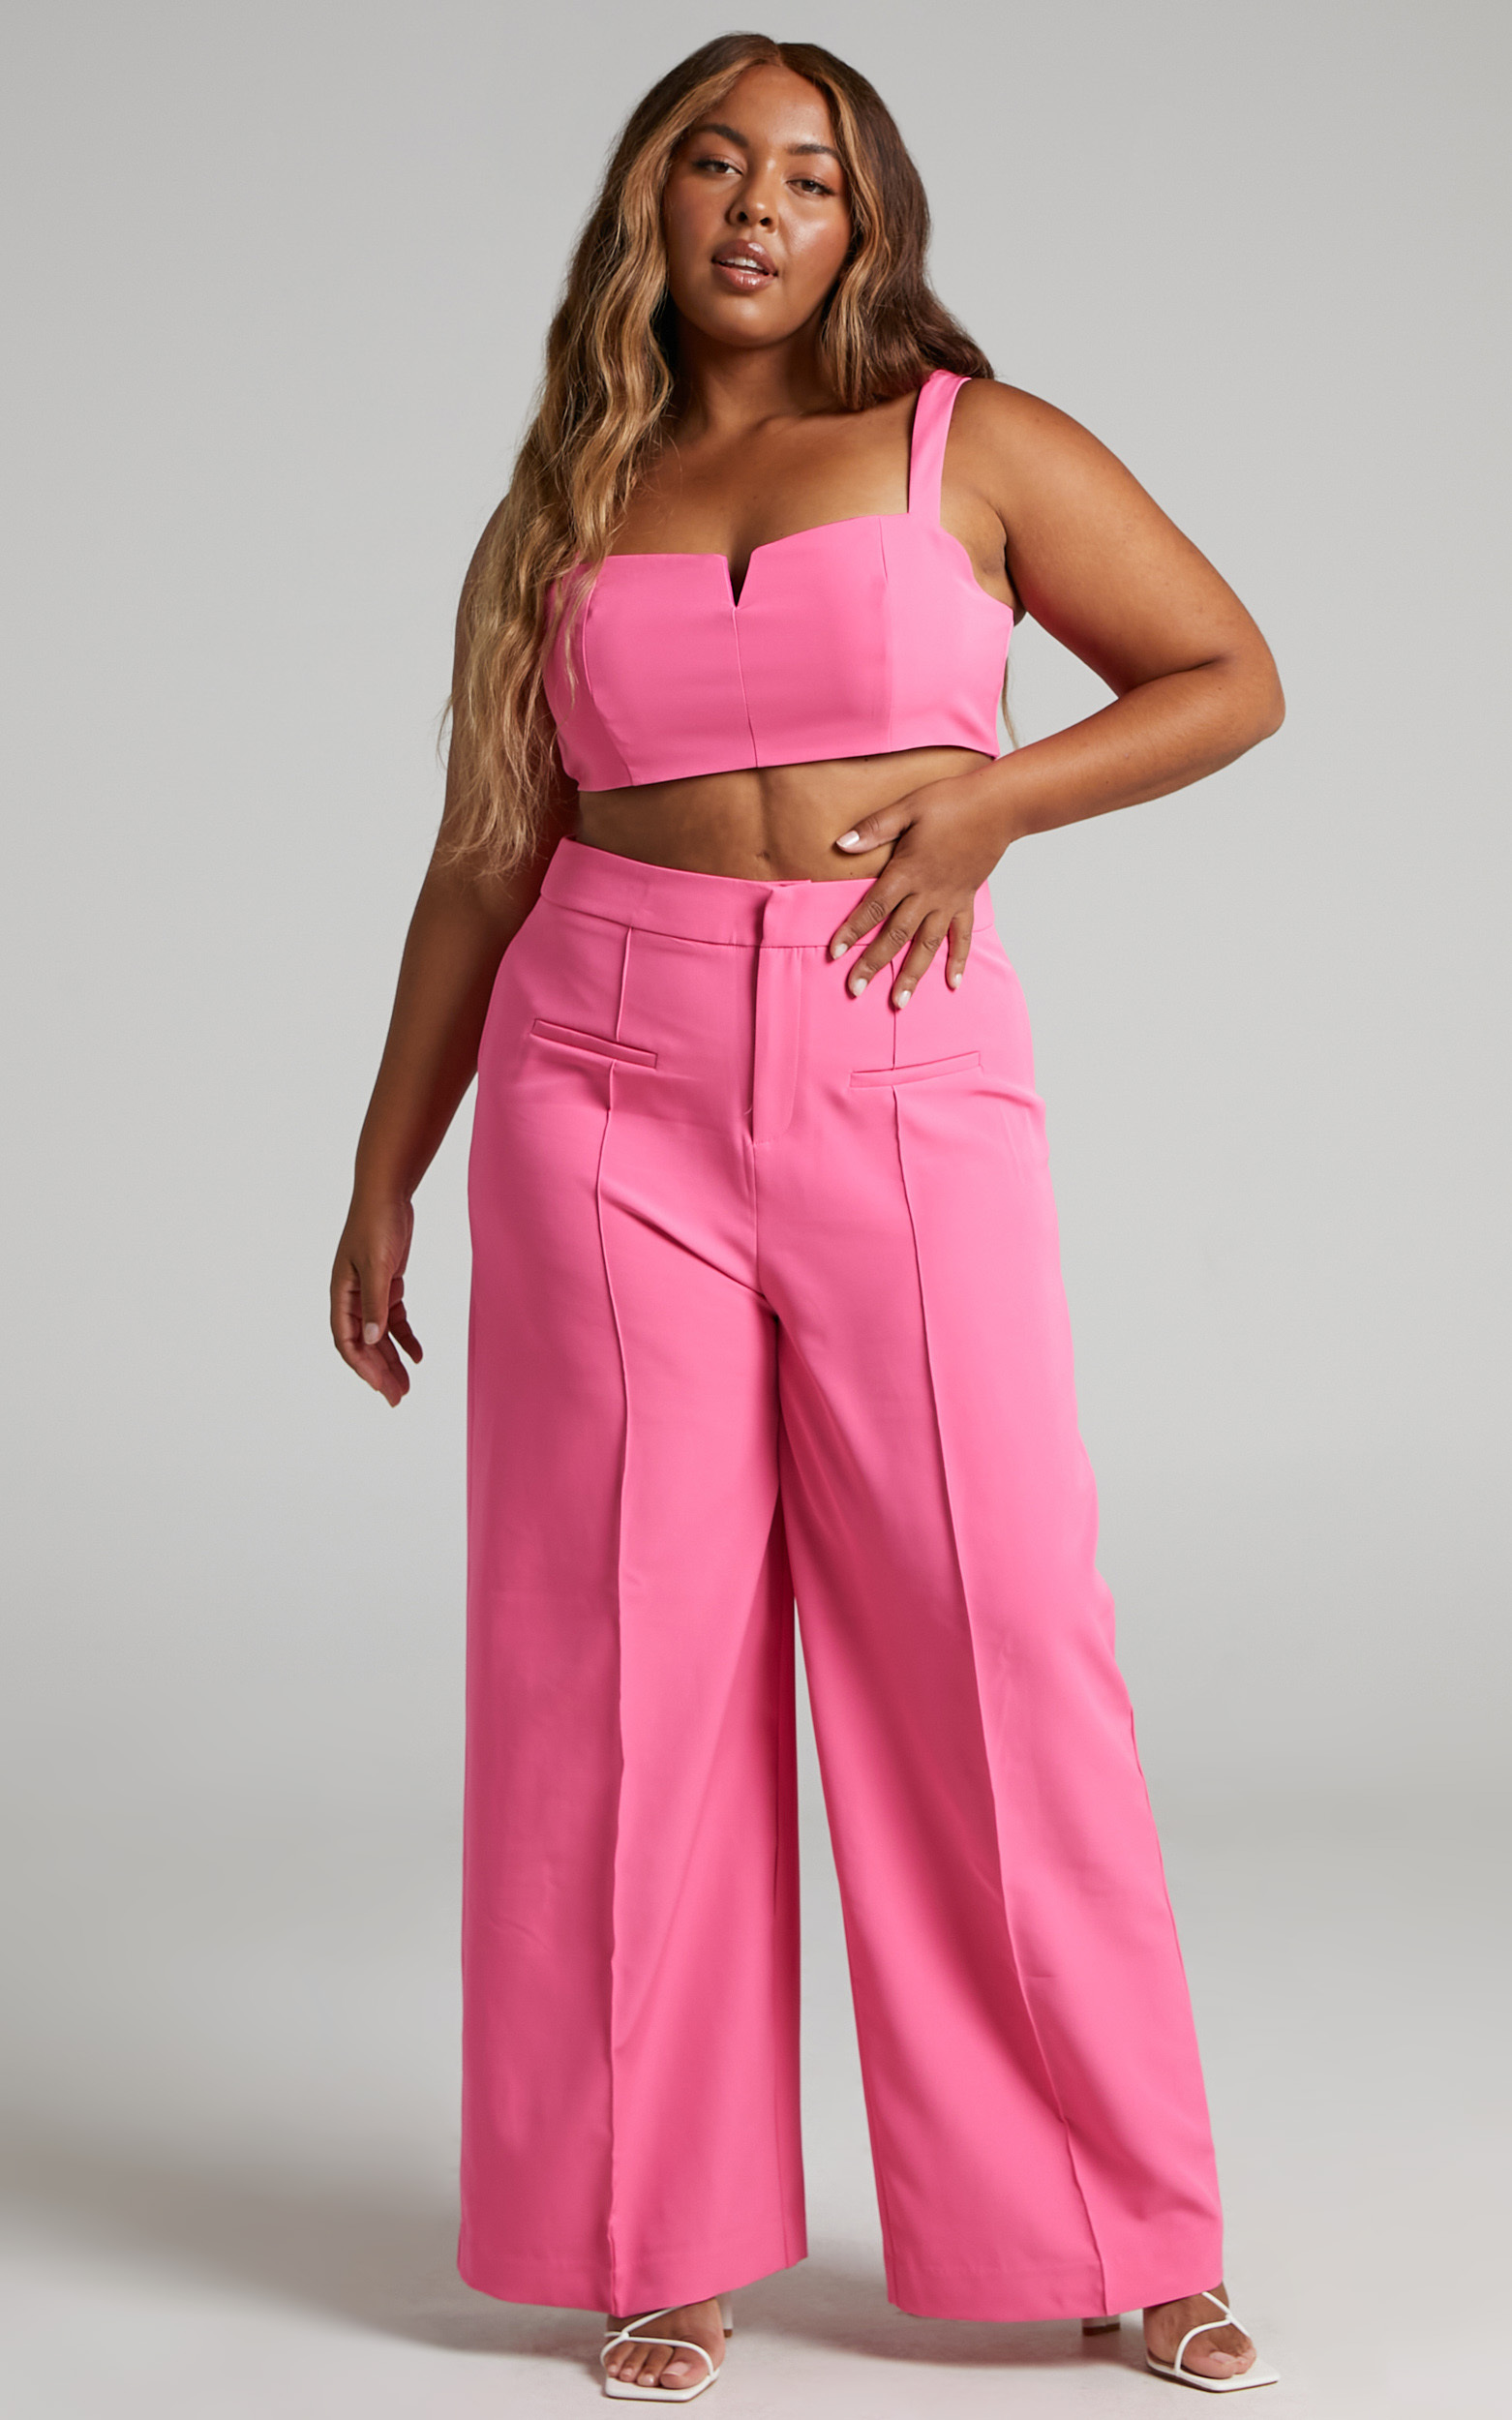 Maida V-Front Crop Top and Wide Leg Pants Two Piece Set in Pink - 06, PNK1, hi-res image number null